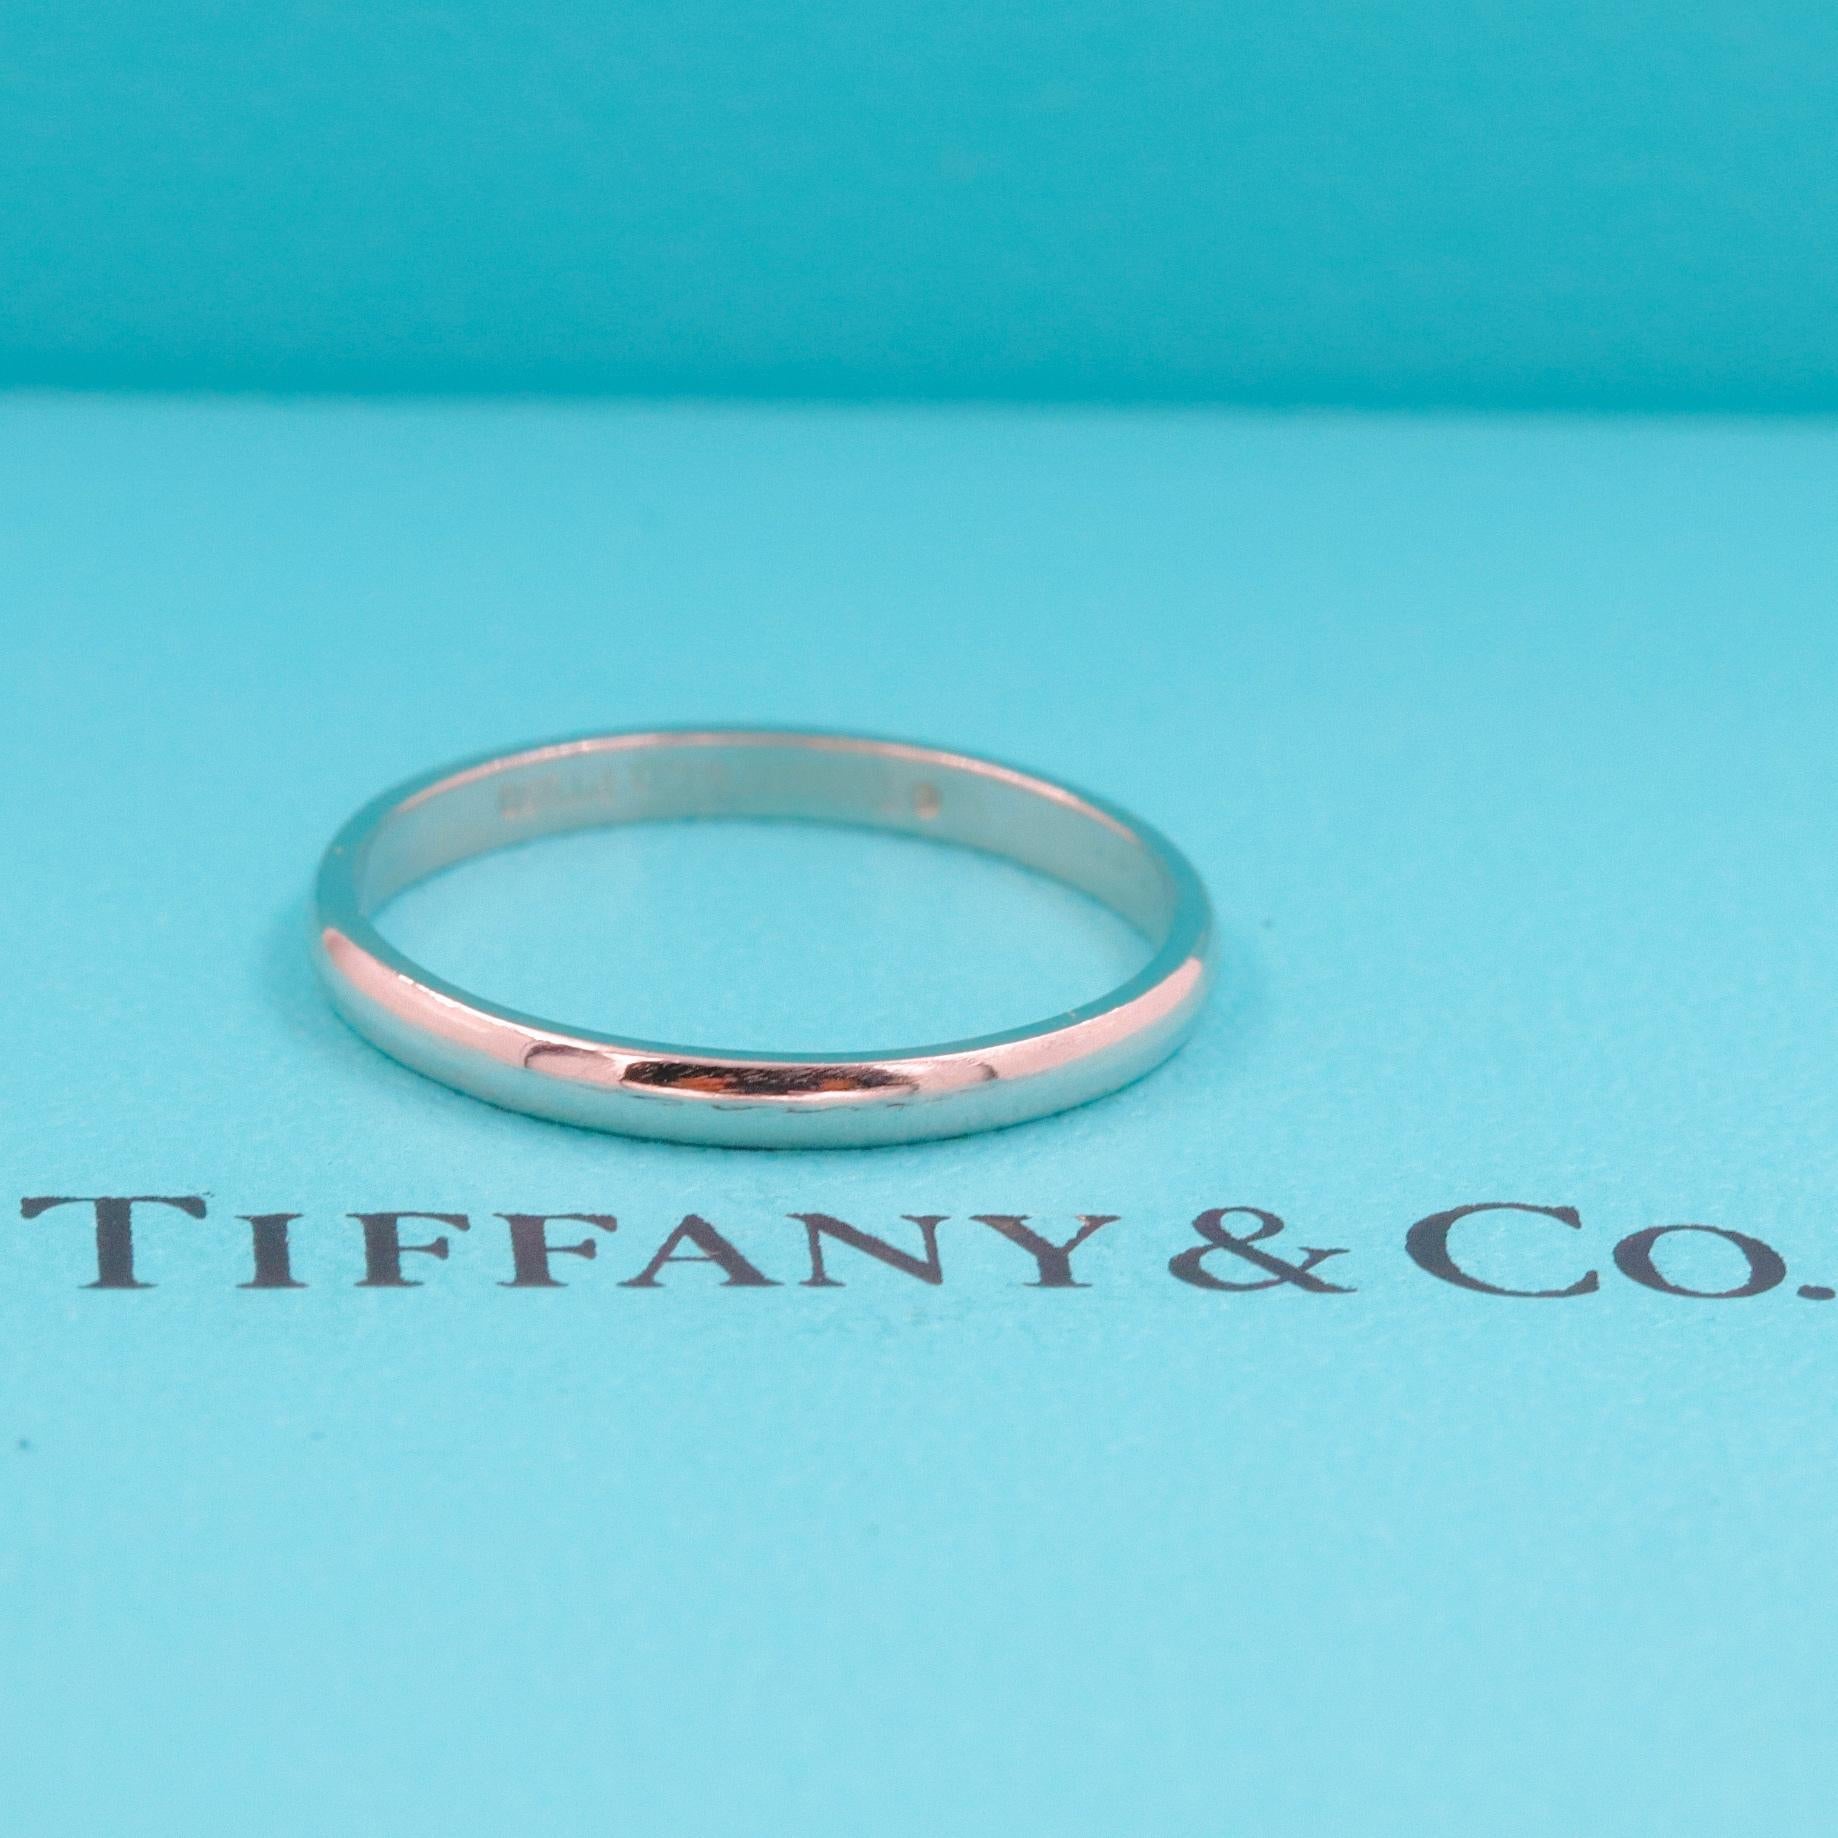 TIFFANY & CO Classic Wedding Band Ring

Style:  2 MM
Metal:  Platinum PT950
Size:  5 - sizable
Width:  2 MM
Hallmark:  ©TIFFANY&CO.PT950
Includes:  T&C Ring Pouch

Retail Value:  $850

SKU#1150TGC050819-5SZ-VV-KK